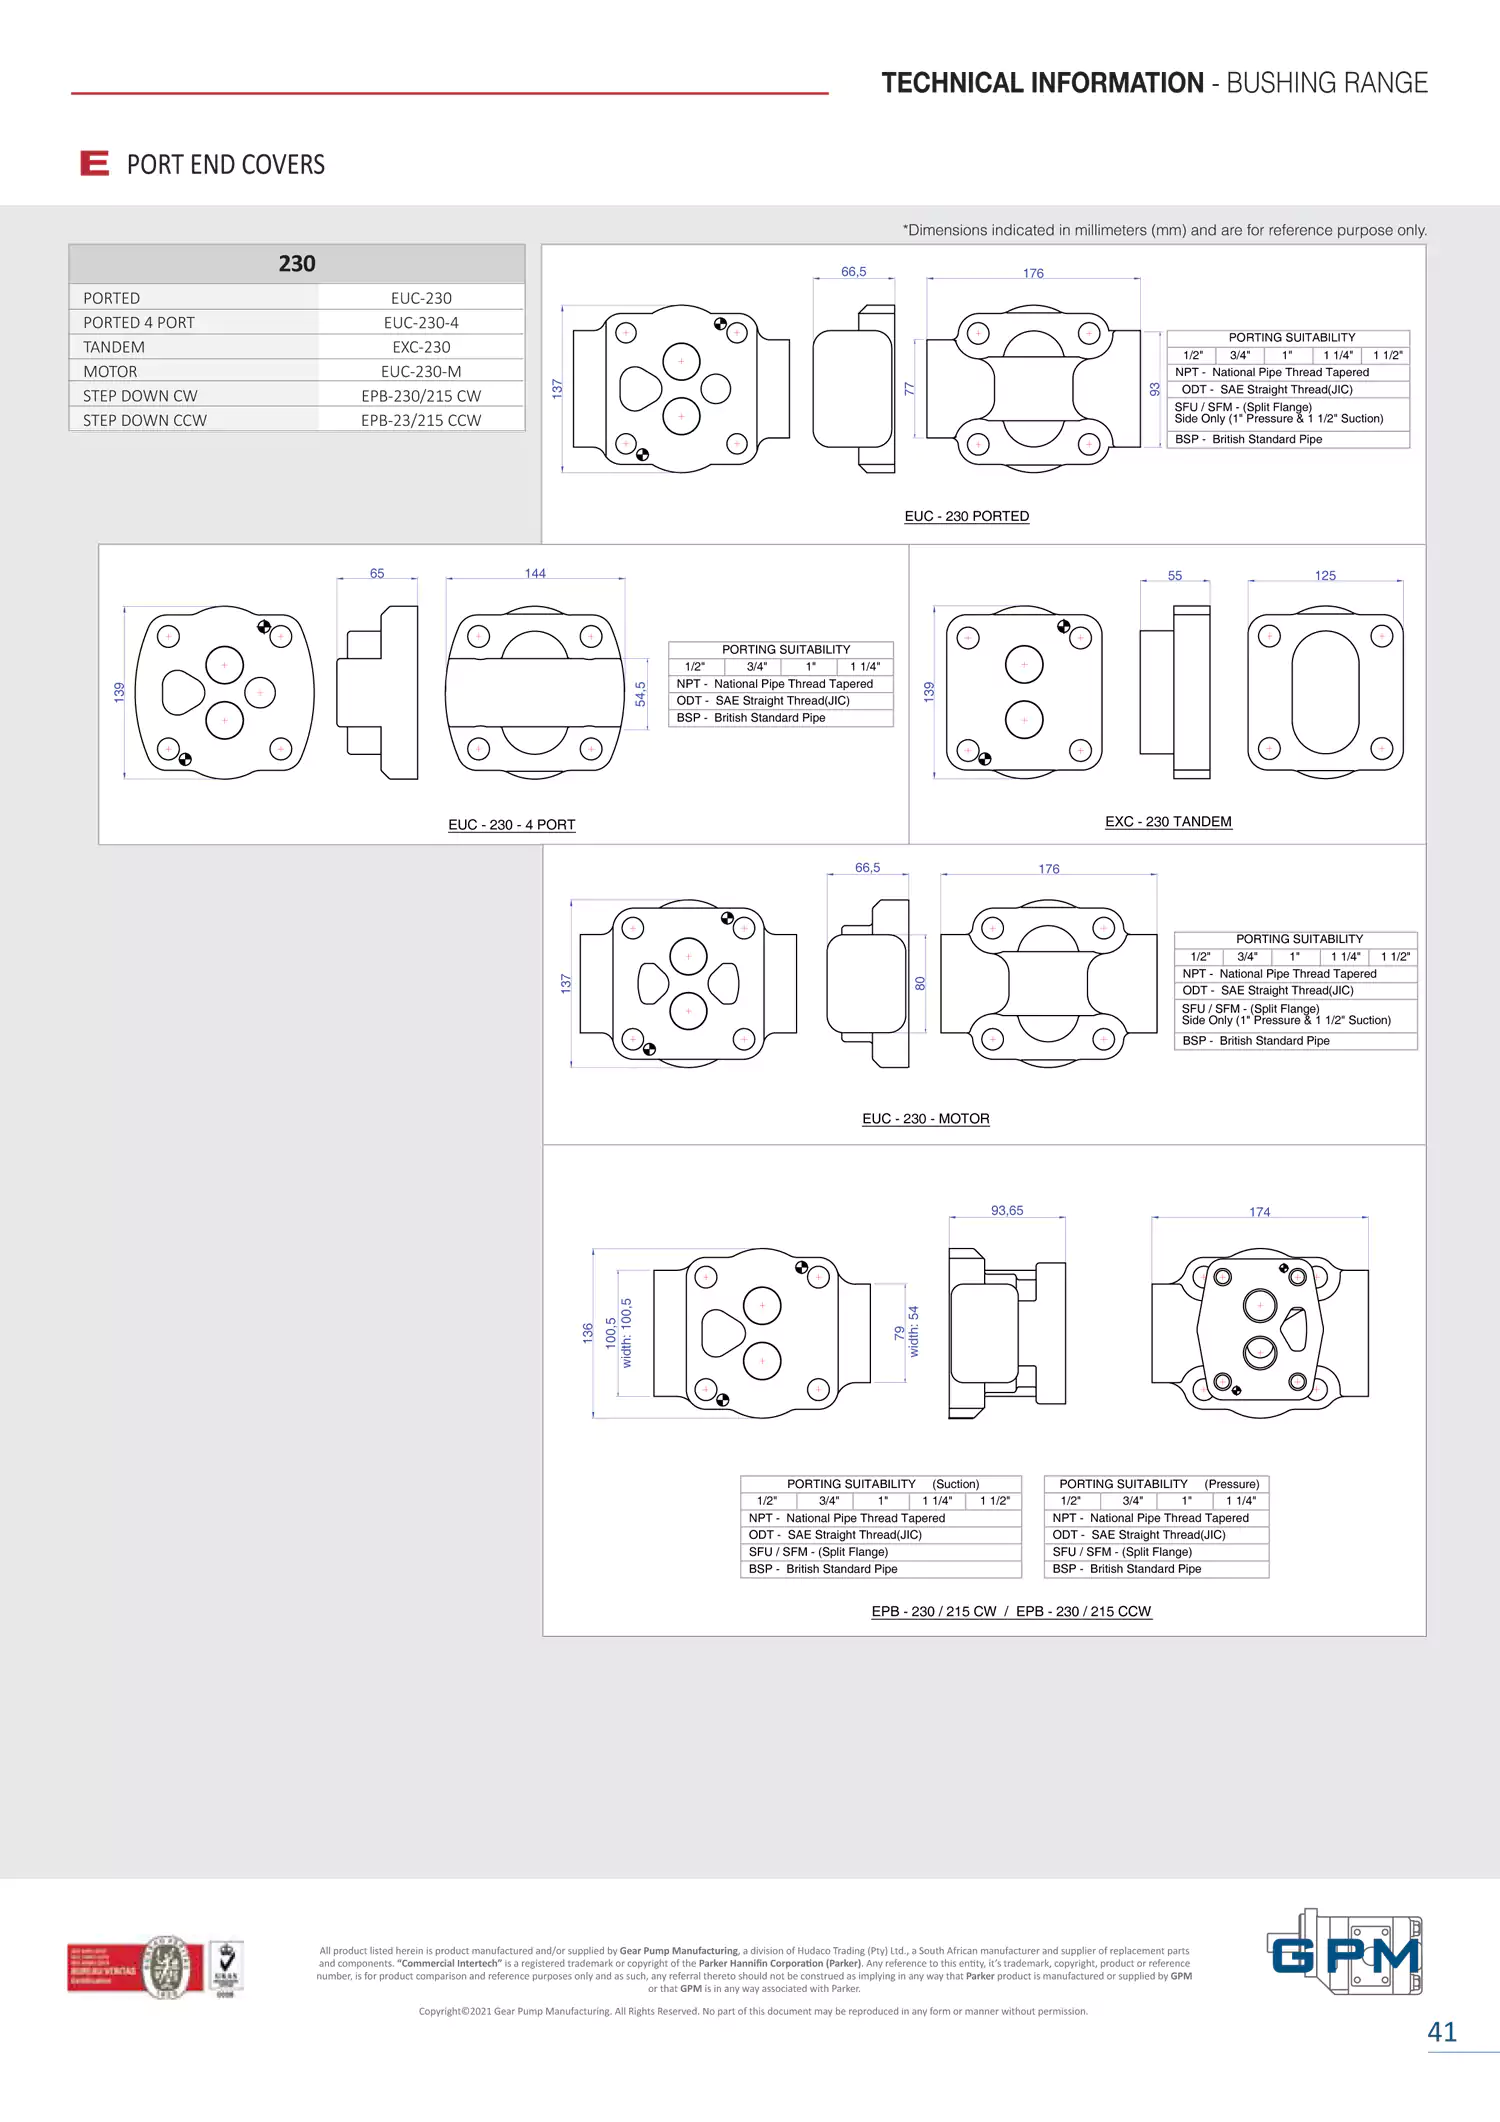 Page-41 - Technical Information - Bushing Range - Port End Covers